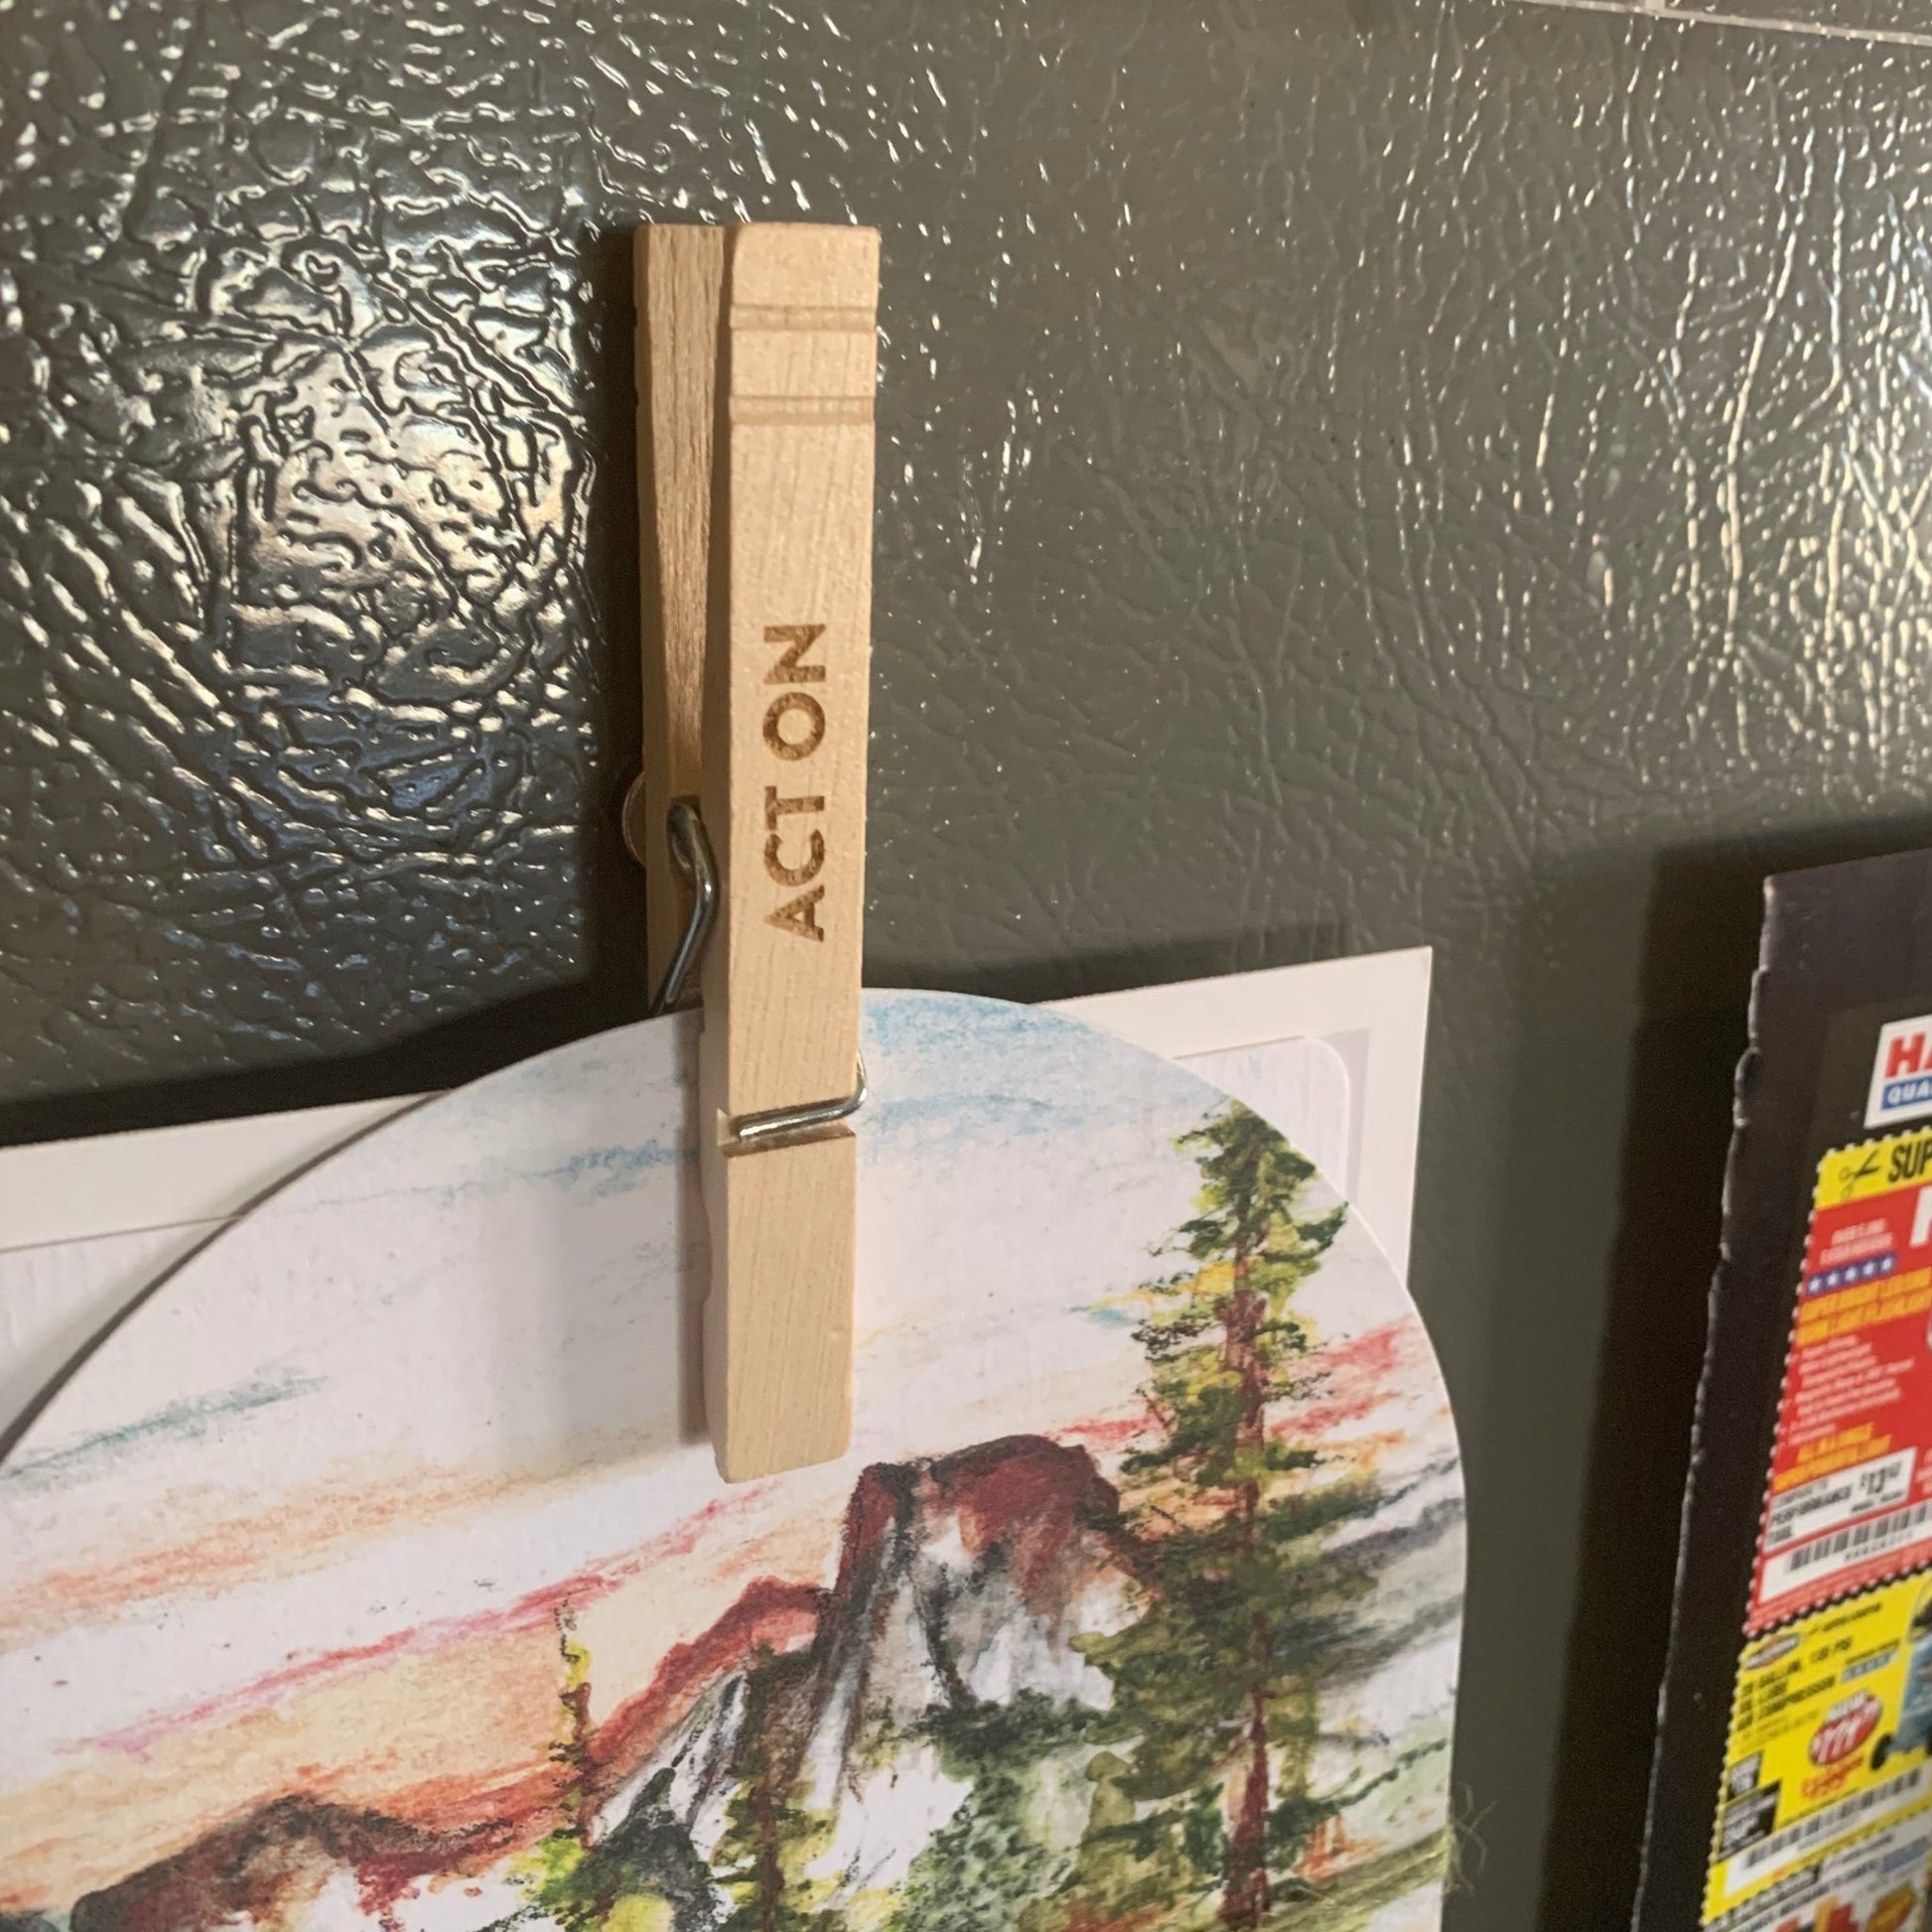 Wood Magnets for command center home - refrigerator magnets by LeeMo Designs in Bend, Oregon